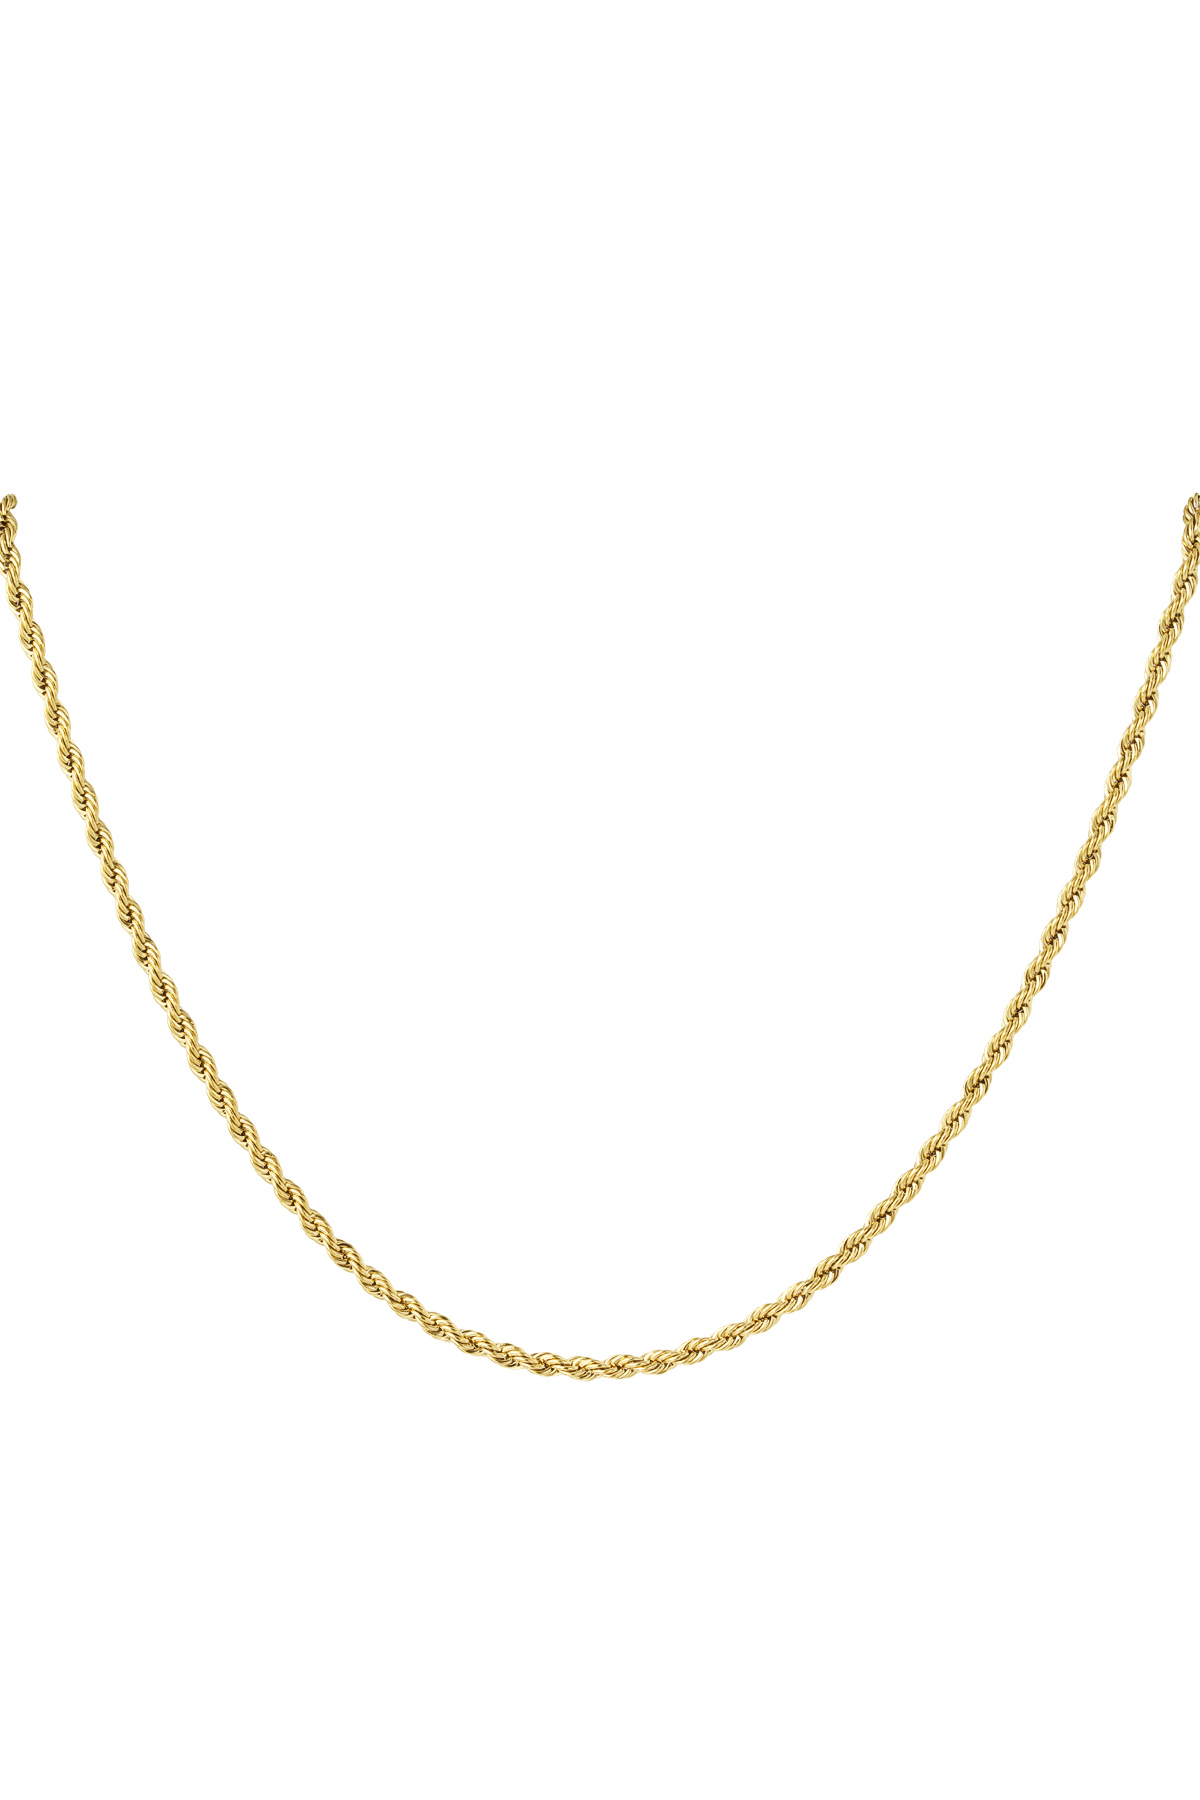 Unisex Stainless Steel Twisted Necklace 60CM - Gold-3.0MM